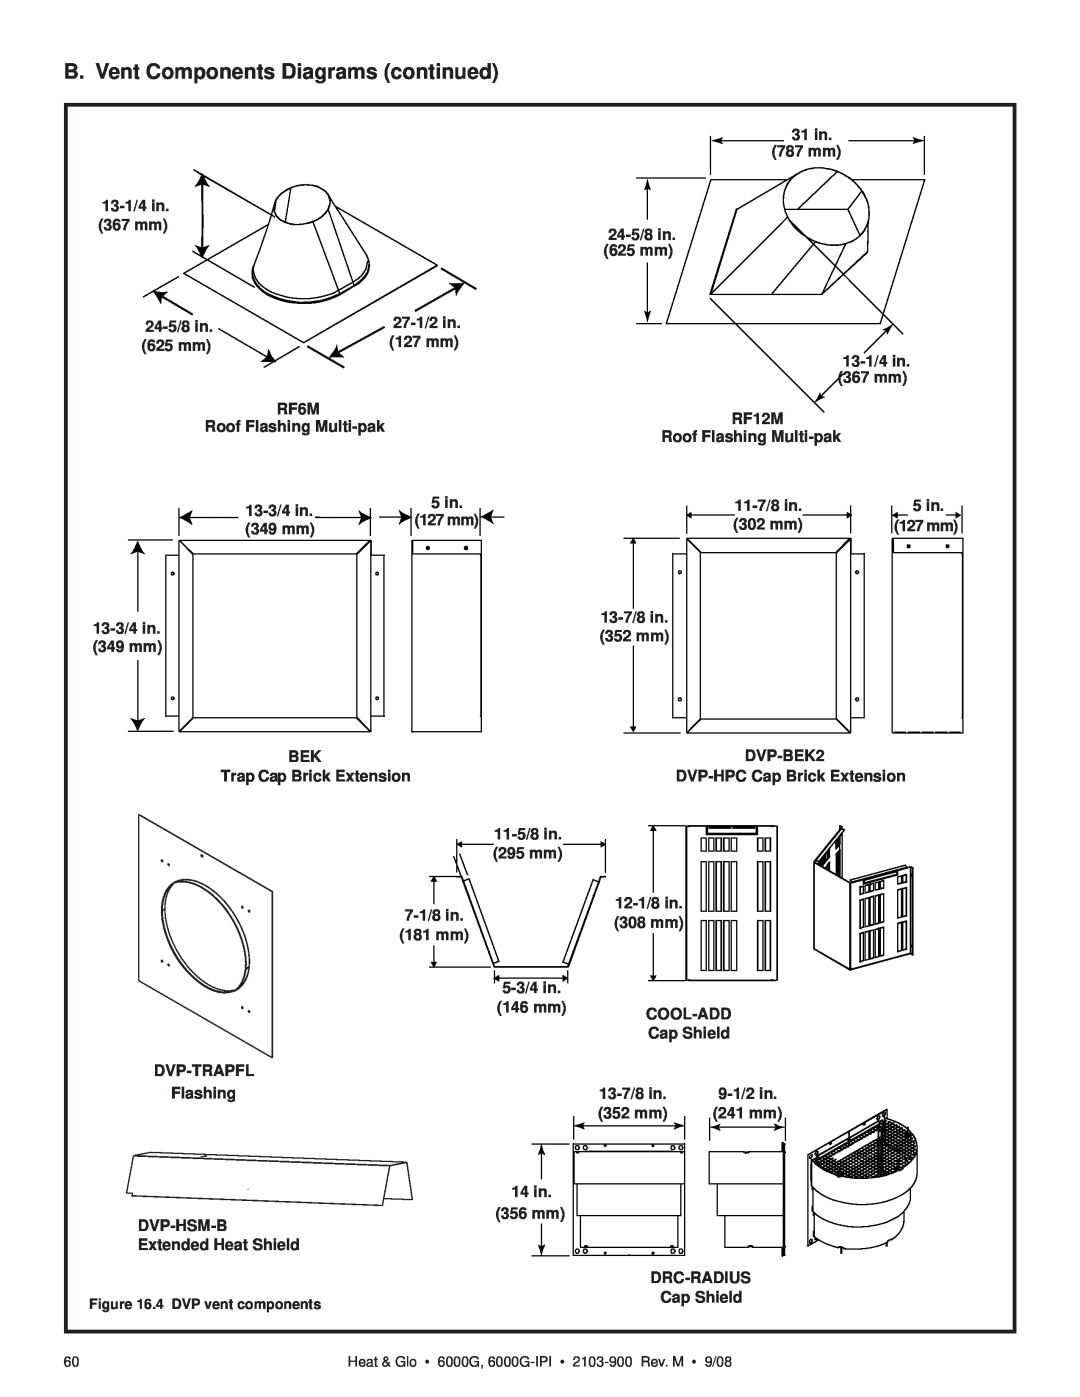 Heat & Glo LifeStyle 6000G-LP B. Vent Components Diagrams continued, 31 in, 787 mm, 13-1/4in, 367 mm, 24-5/8in, 625 mm 